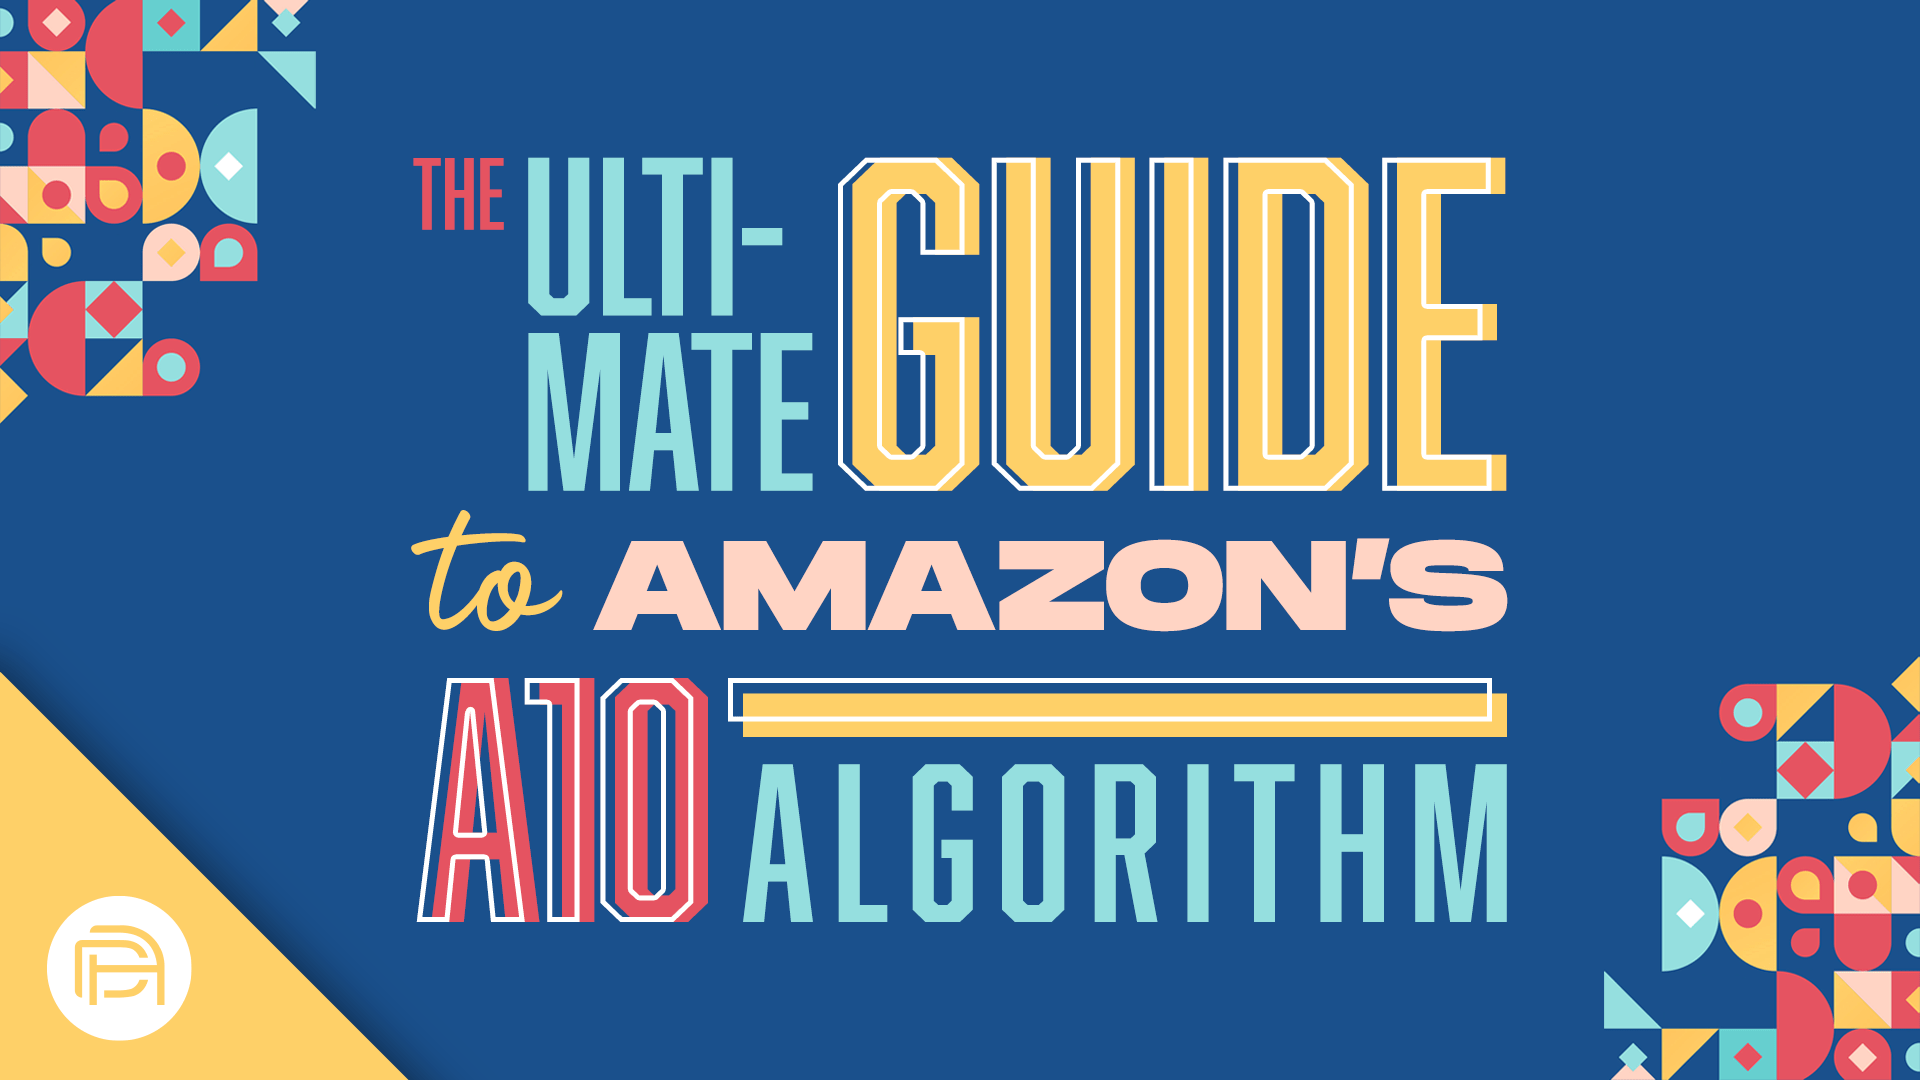 The Ultimate Guide to Amazon’s A10 Algorithm